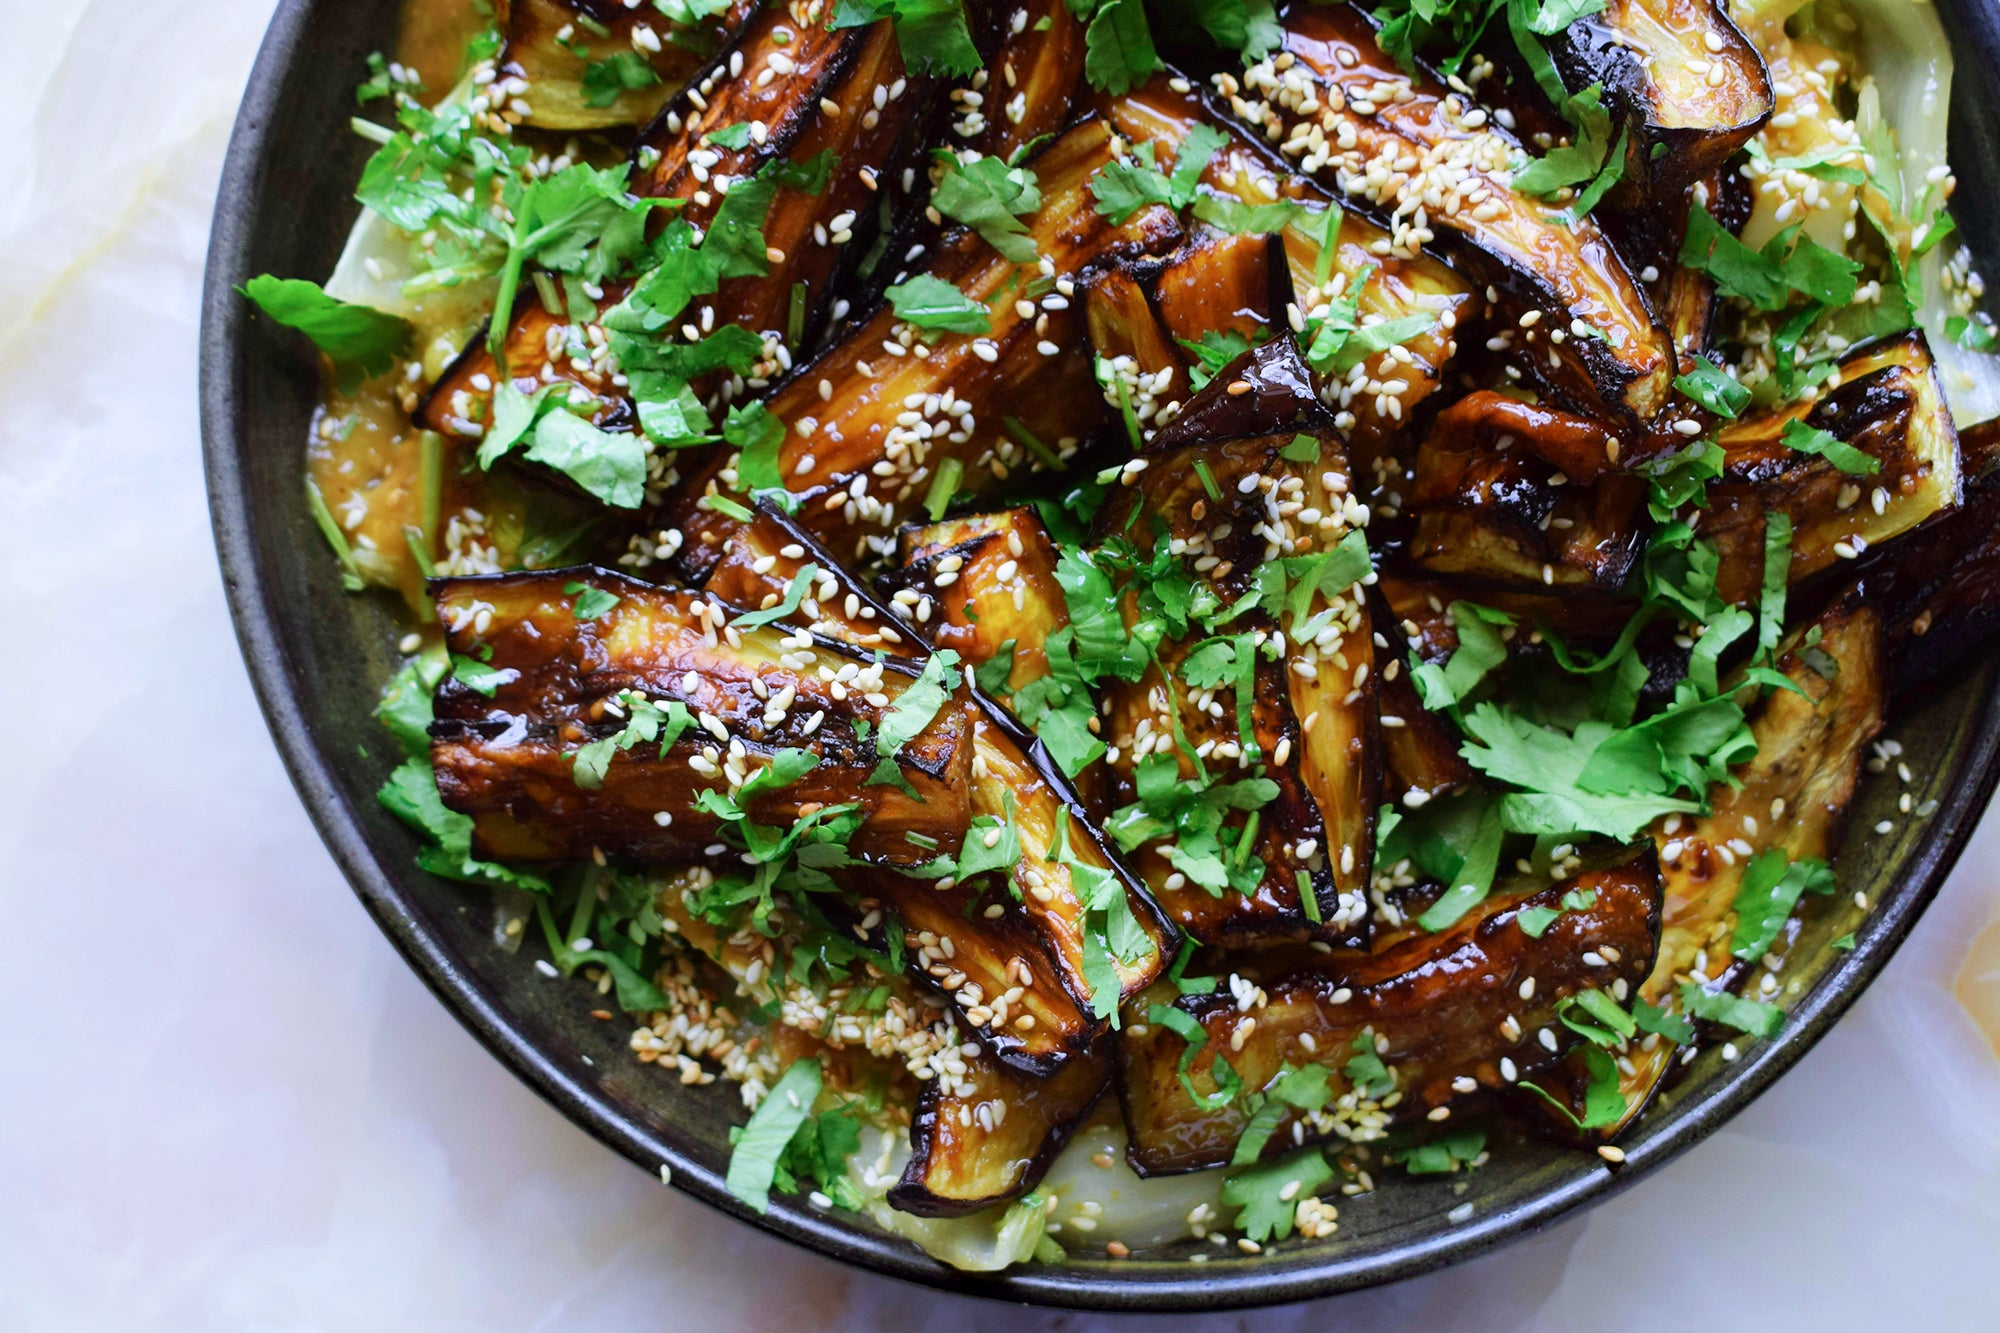 Aubergine with miso and Chinese cabbage